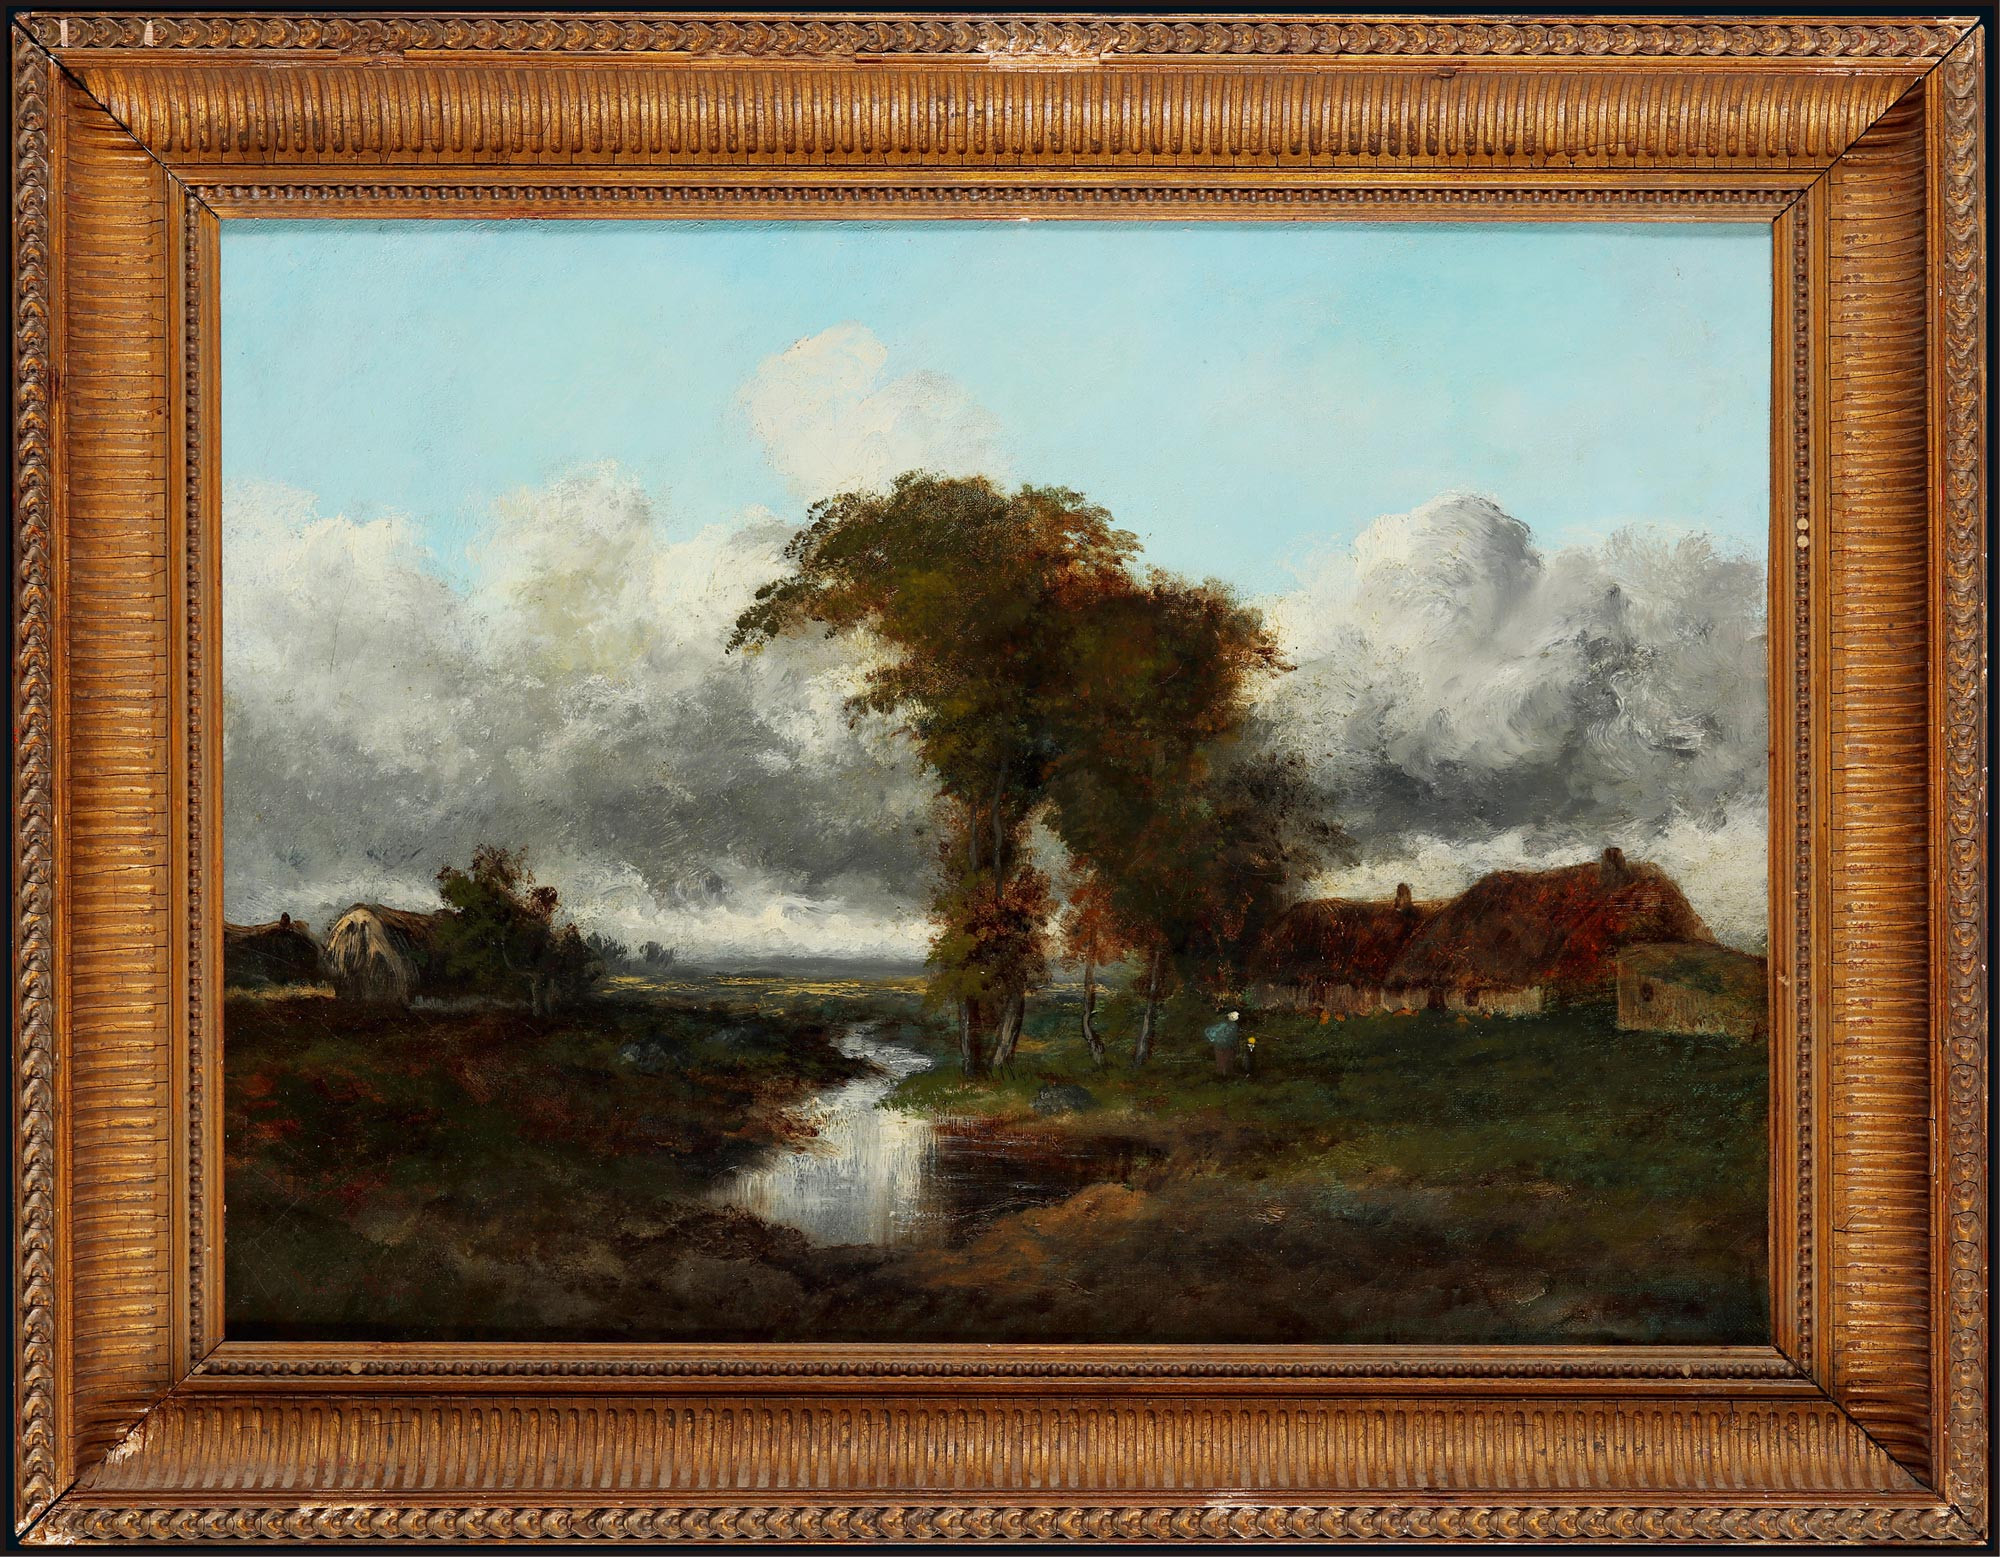 The oil painting “Farmhouse in a Field” by Victor Dupre, a leading French Barbizon painter and landscape painter, with certificate